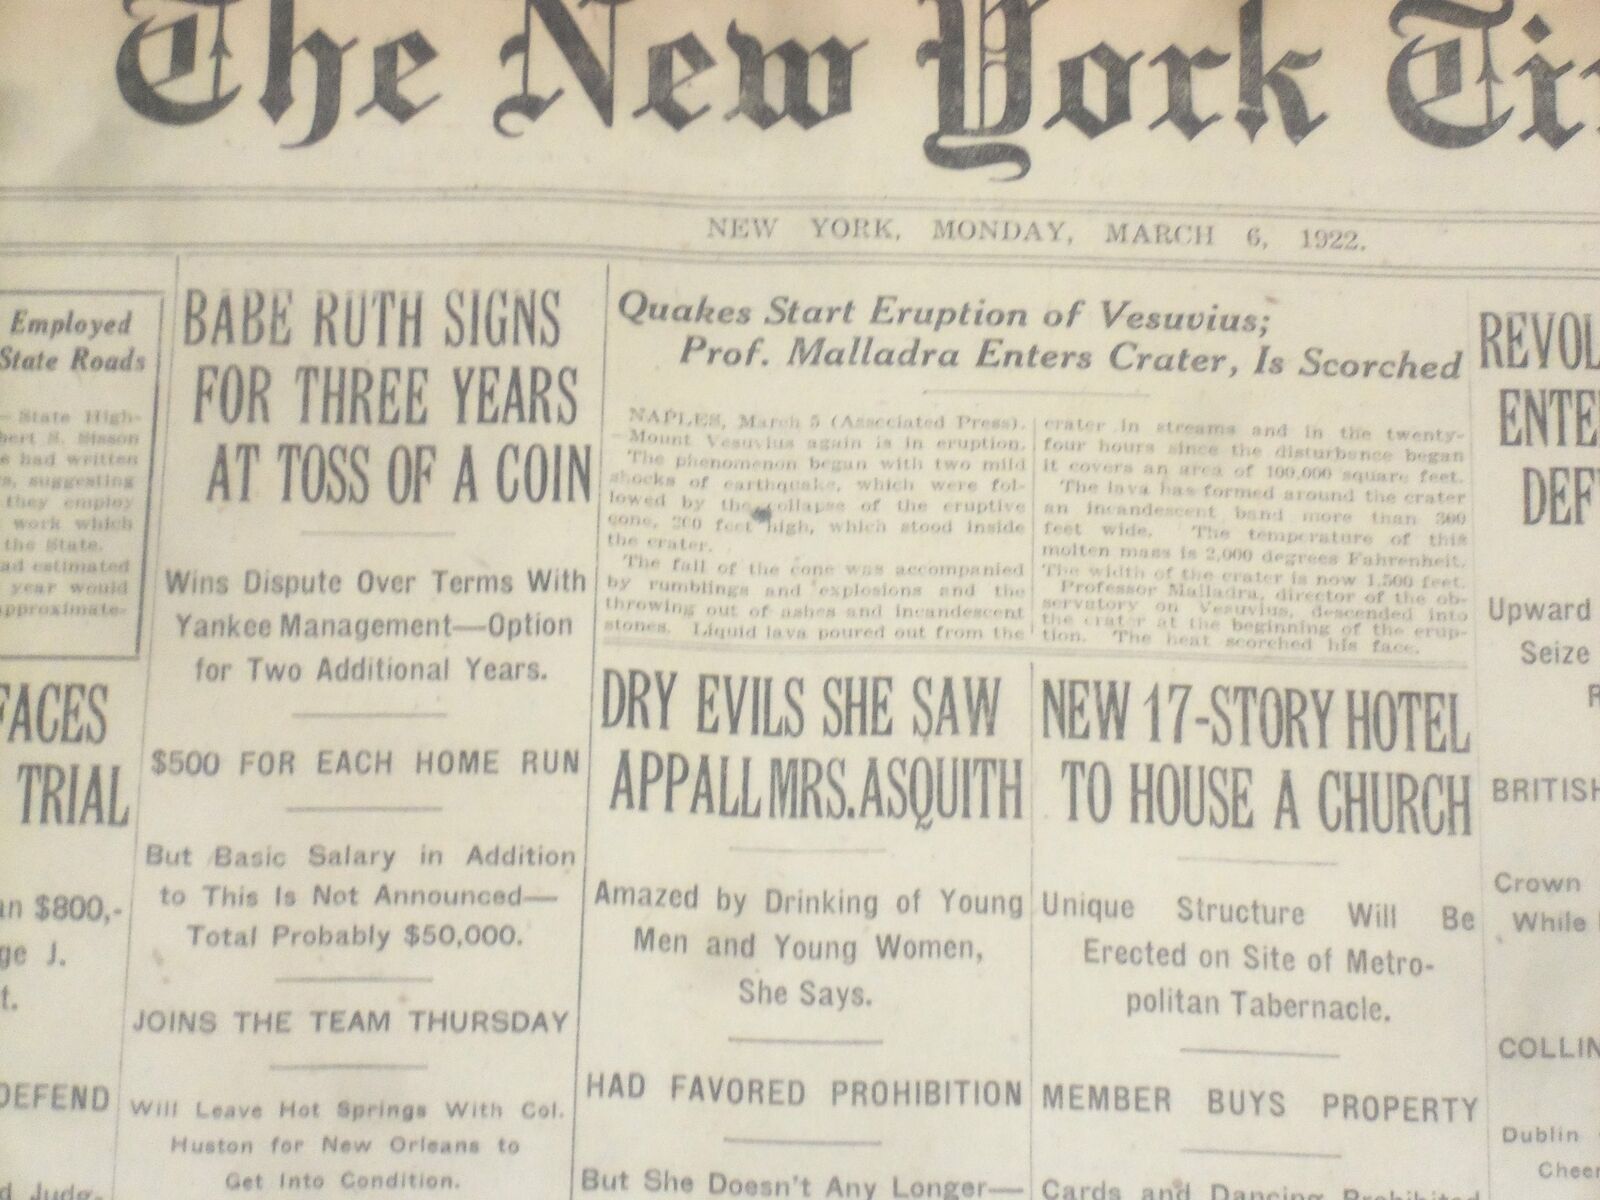 1922 MARCH 6 NEW YORK TIMES- QUAKES START ERUPTION OF VESUVIUS-BABE RUTH-NT 8308